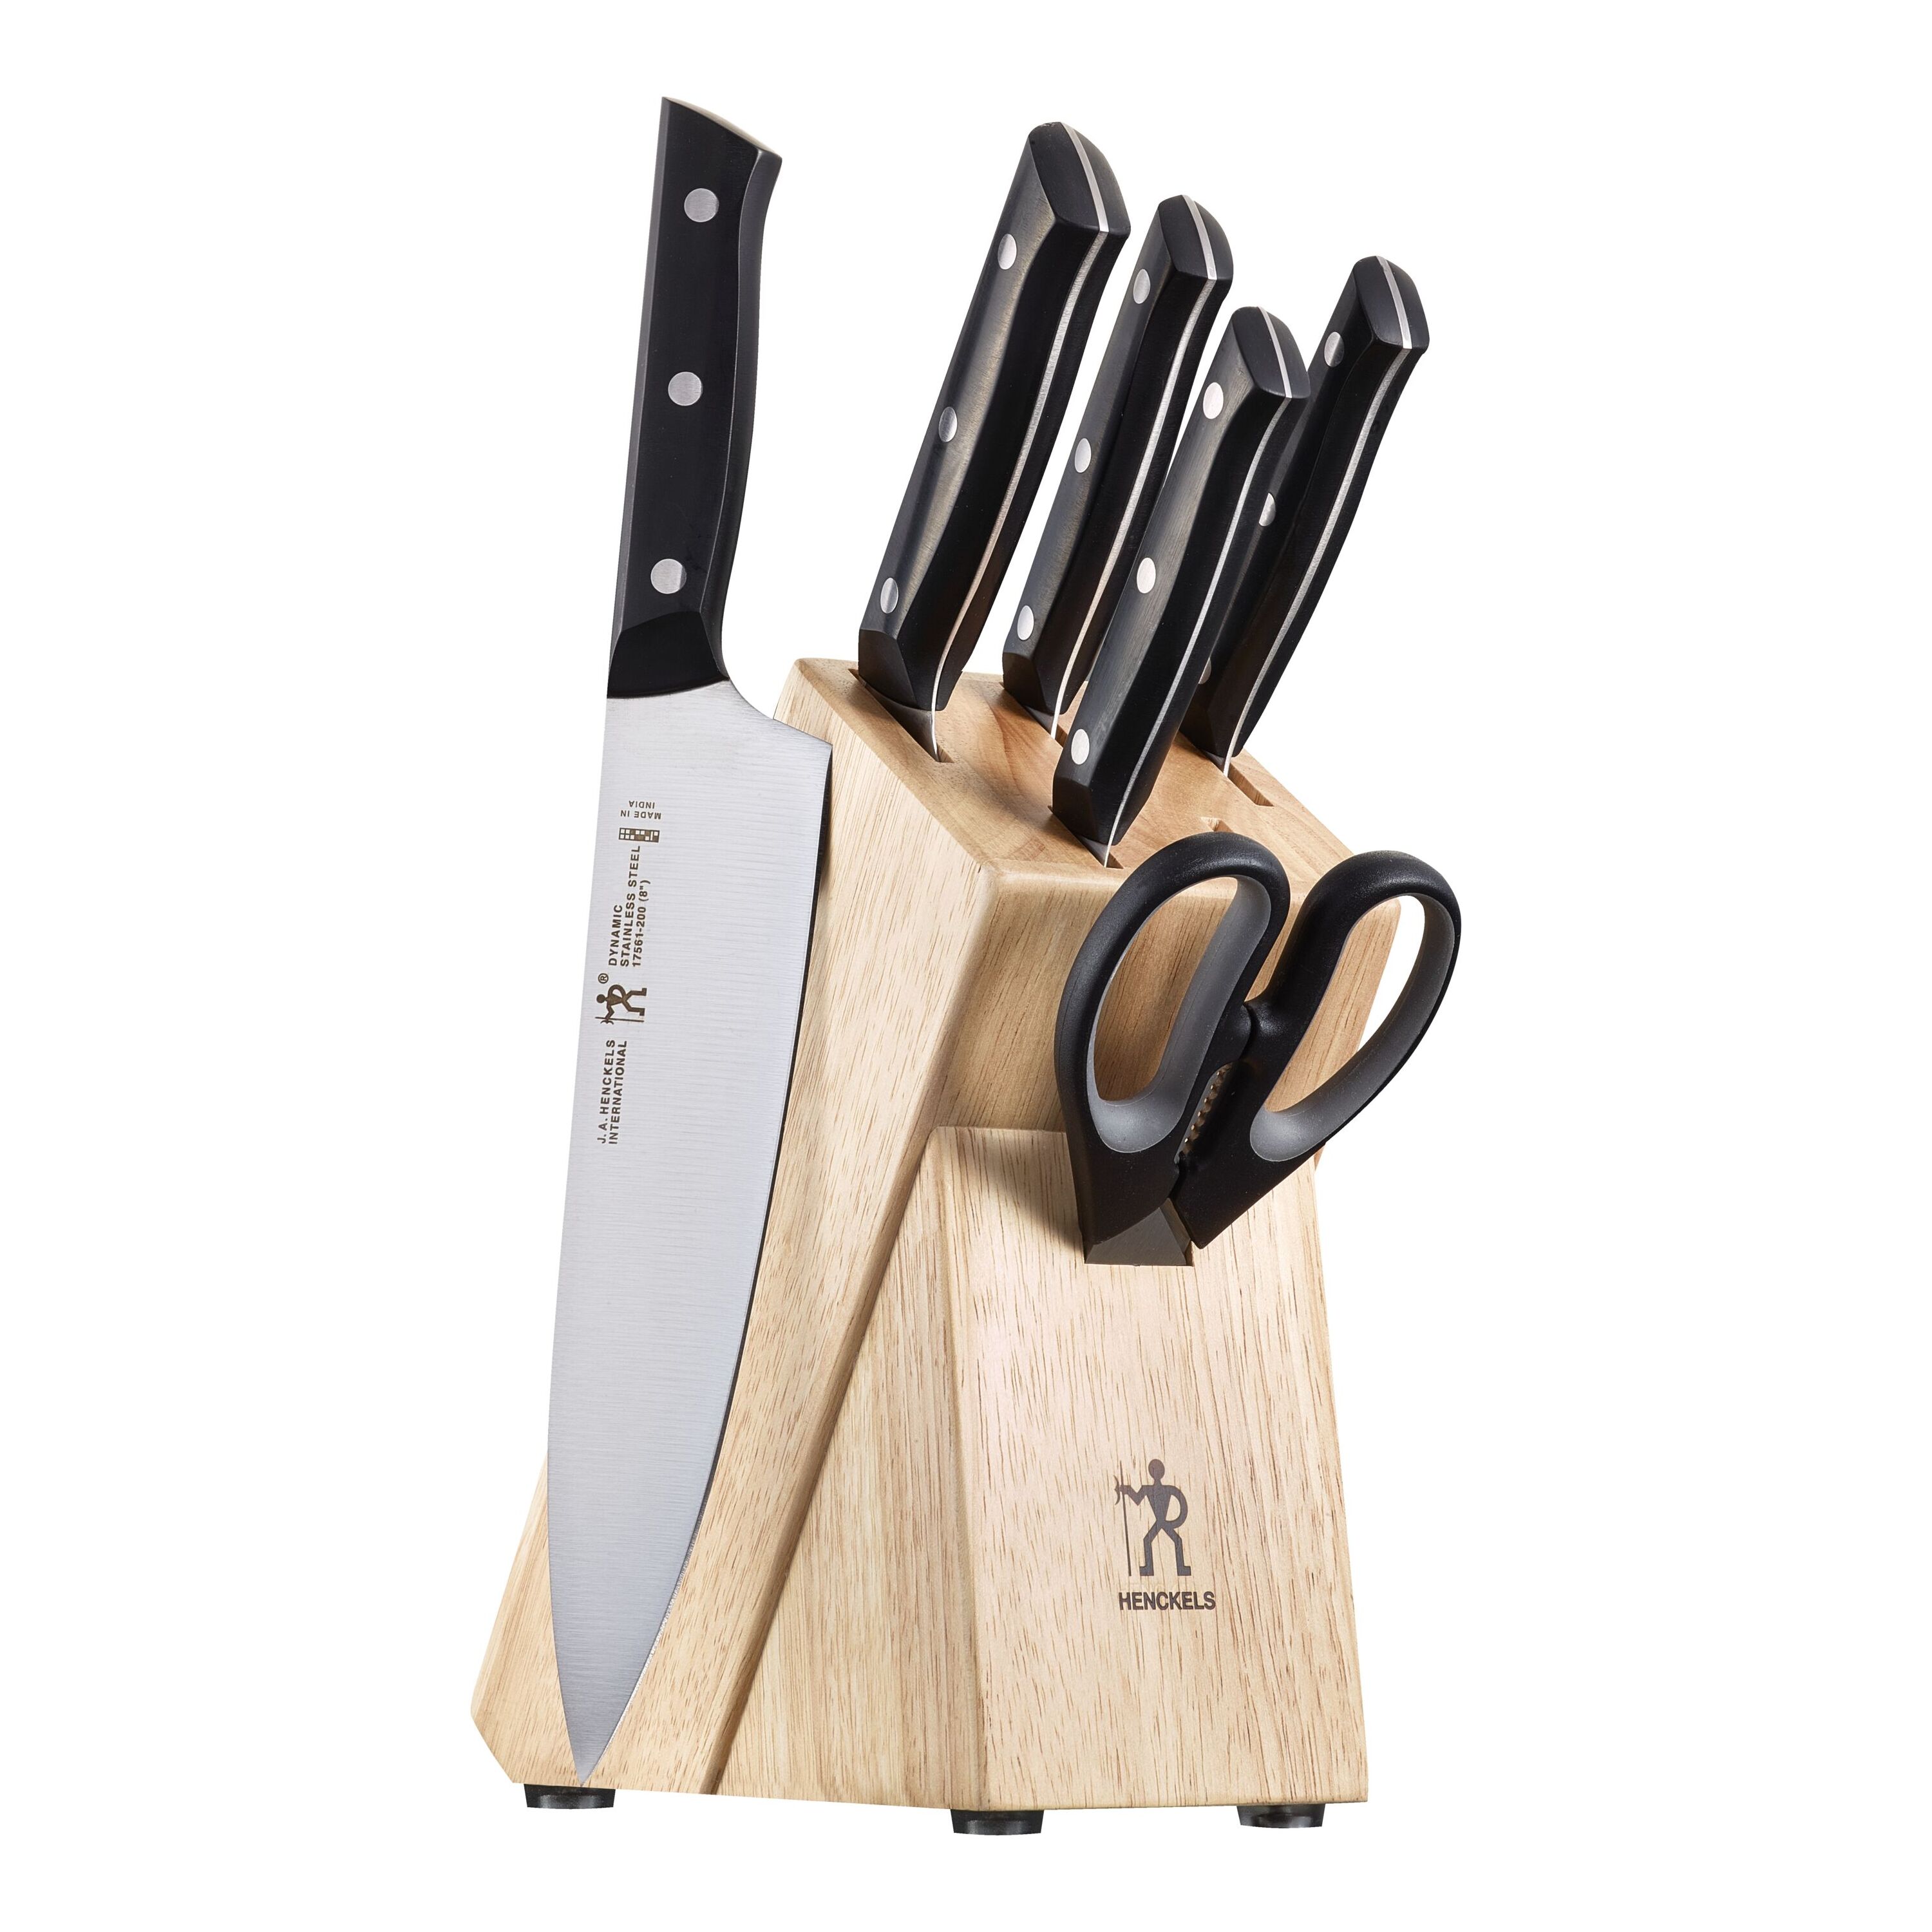 French Home 7 Piece Stainless Steel Knife Block Set & Reviews